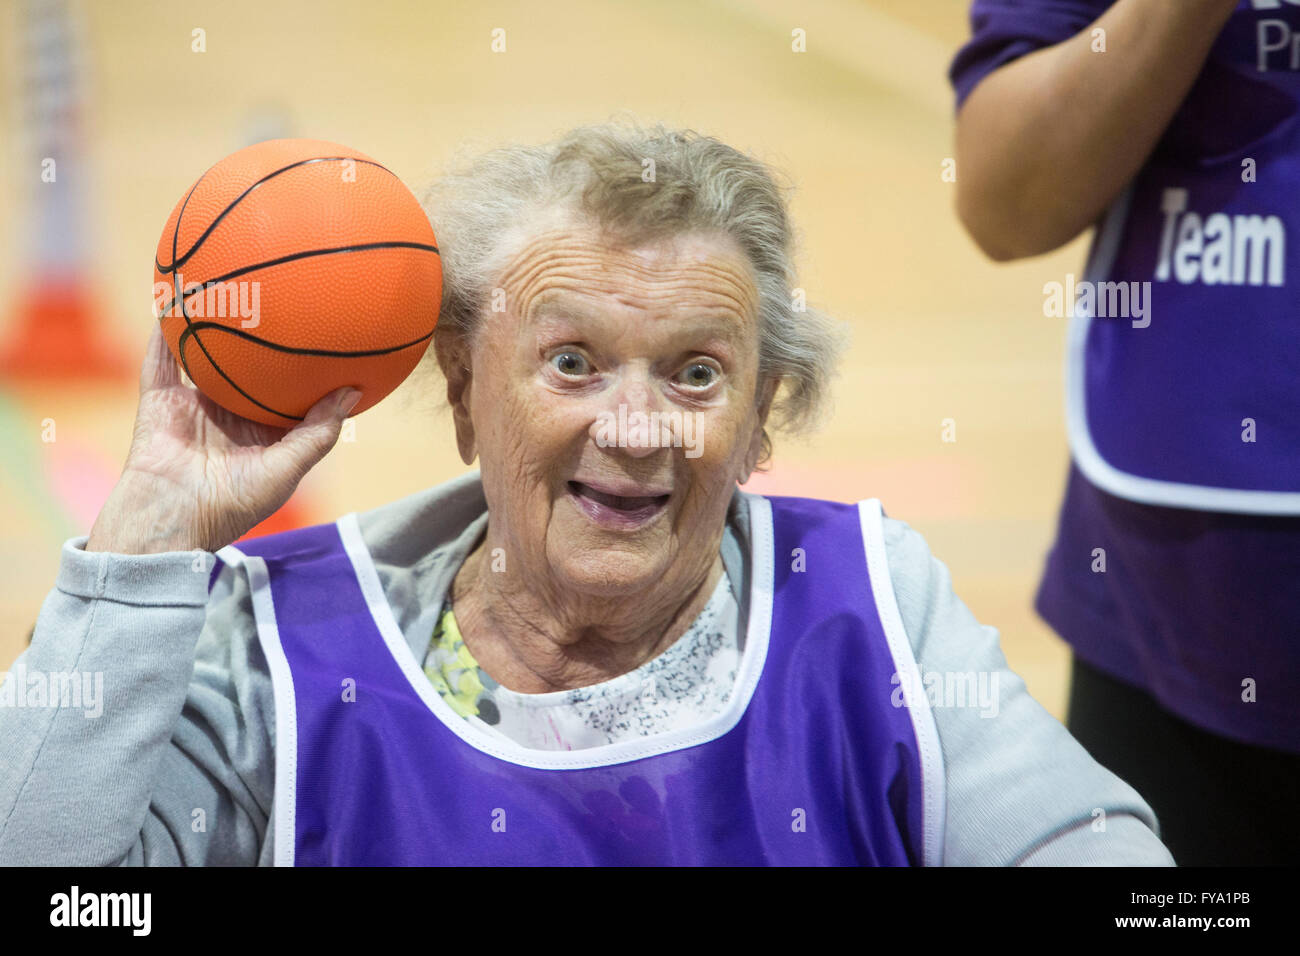 Elderly person keeping fit by taking part in sport Stock Photo